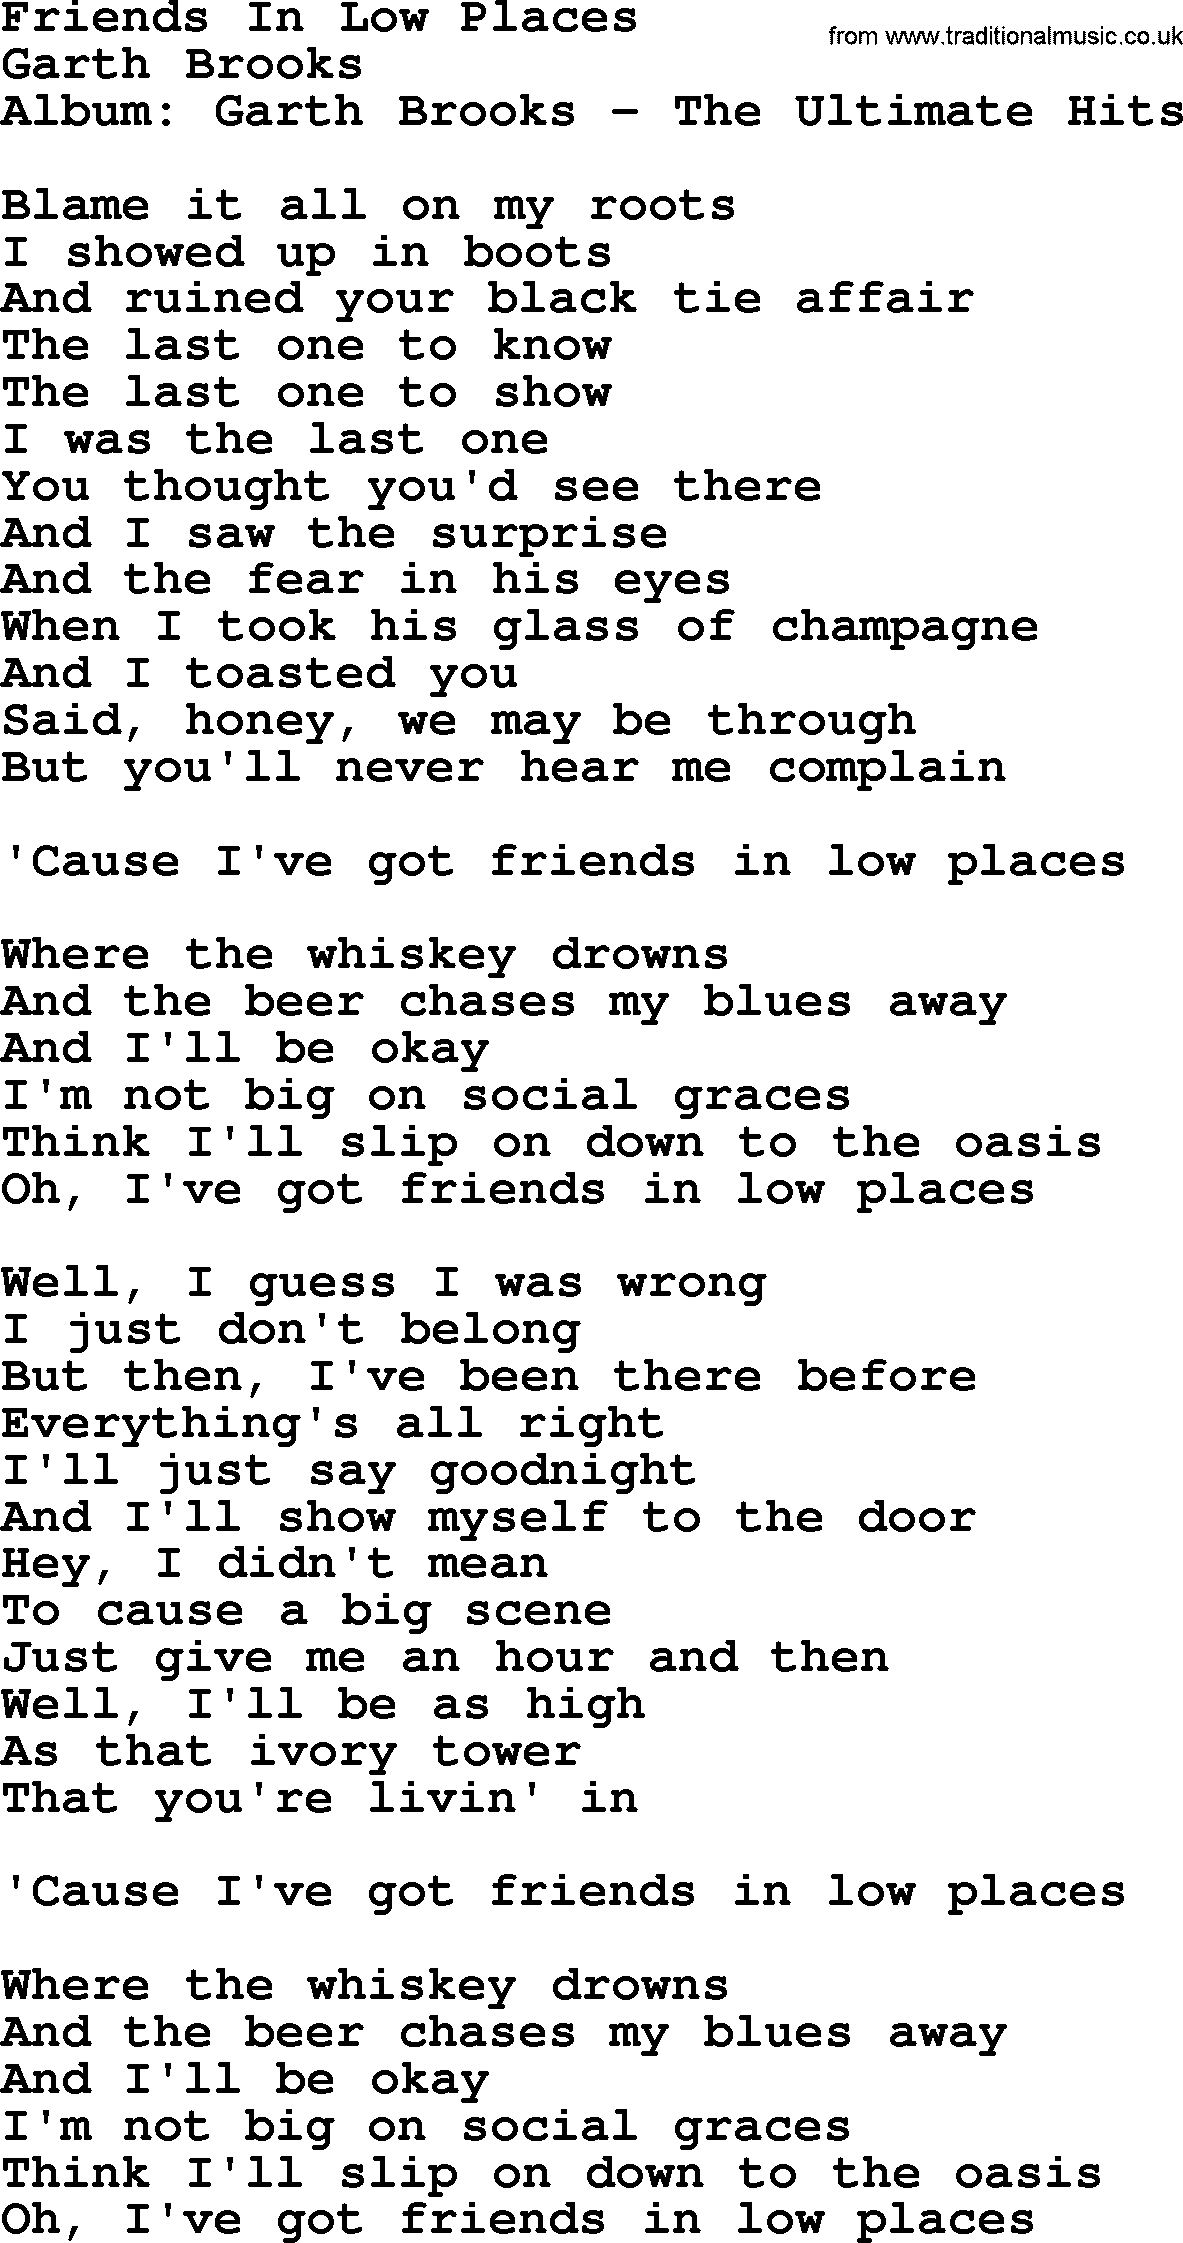 Friends In Low Places Chords Friends In Low Places Garth Brooks Lyrics